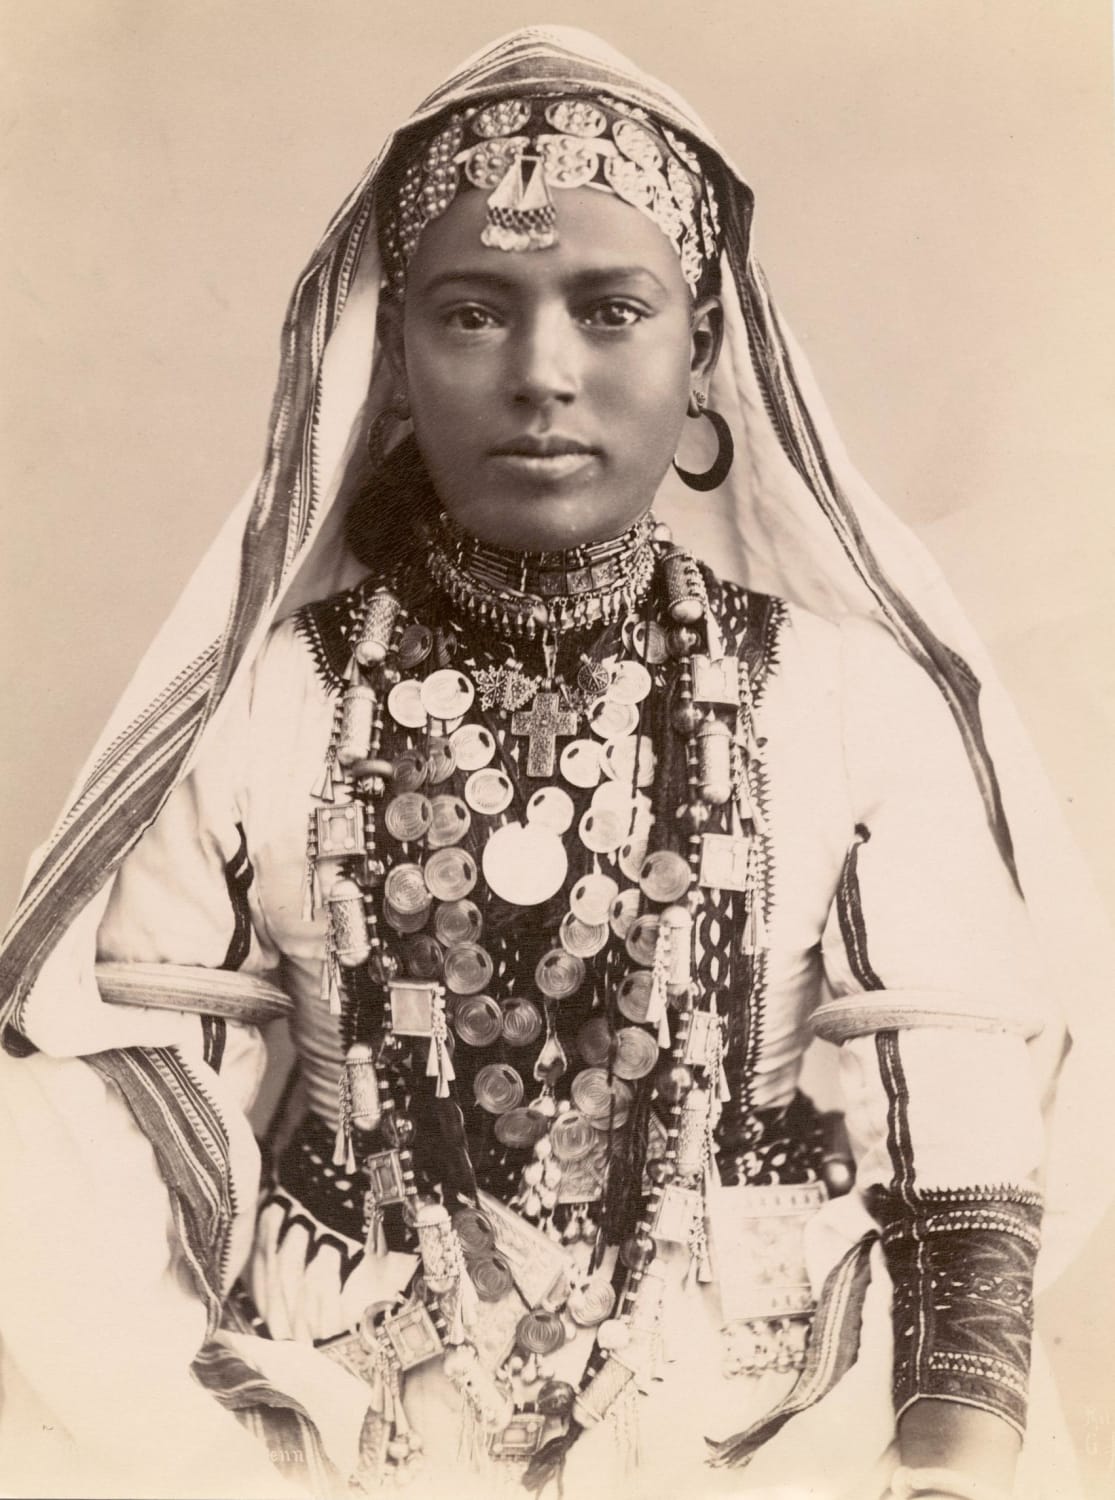 A woman in elaborate robes and jewelry, either Syria or Egypt, circa 1910.